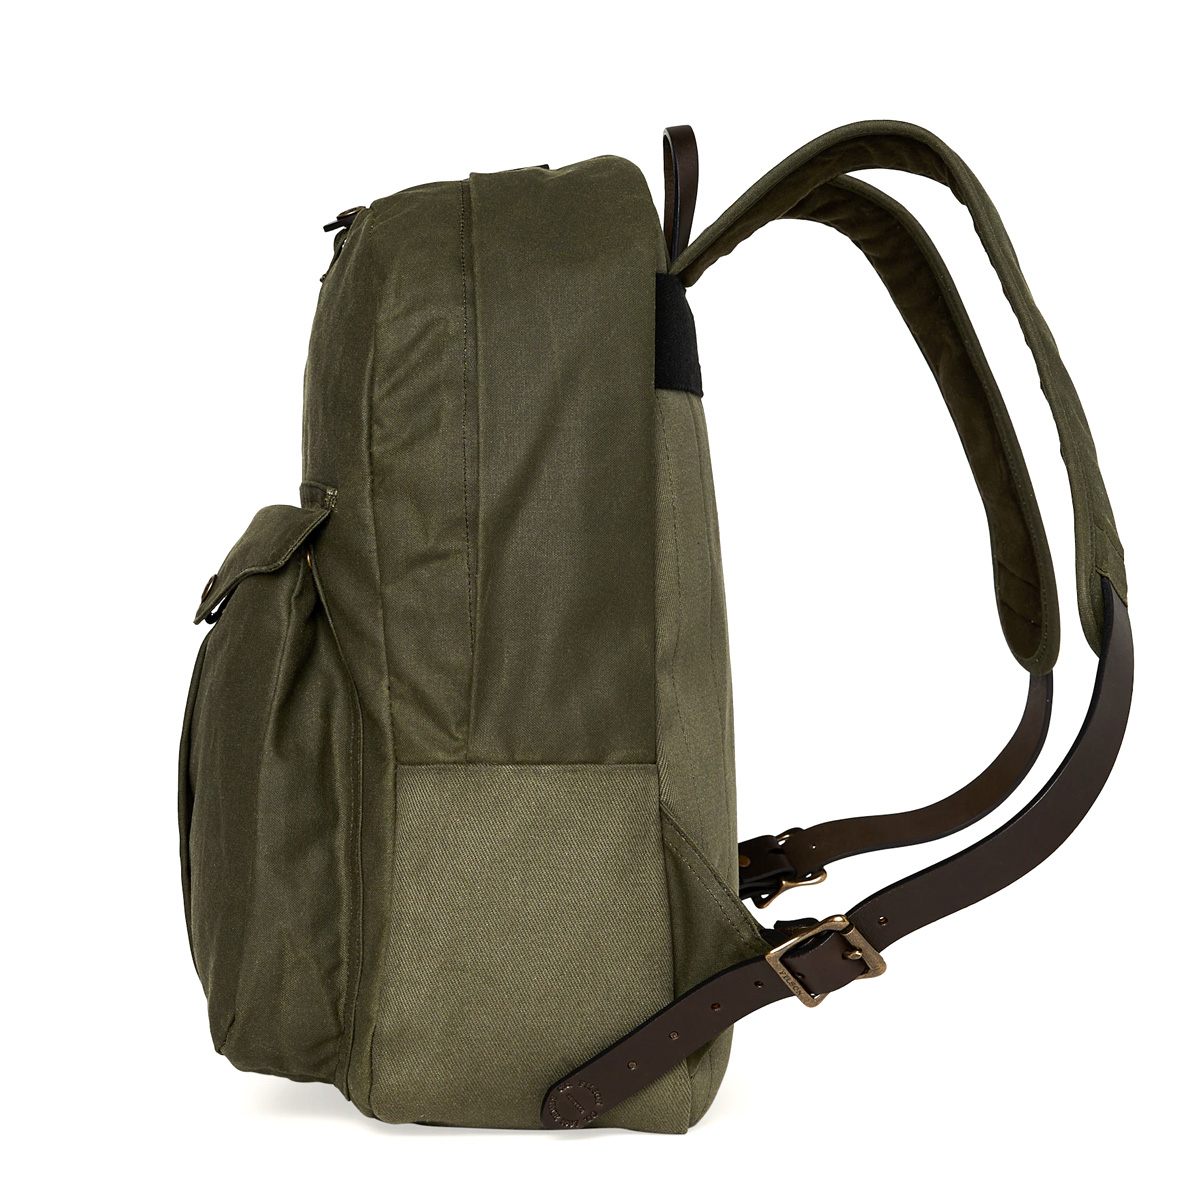 Filson Journeyman Backpack Otter Green backpack with style and character